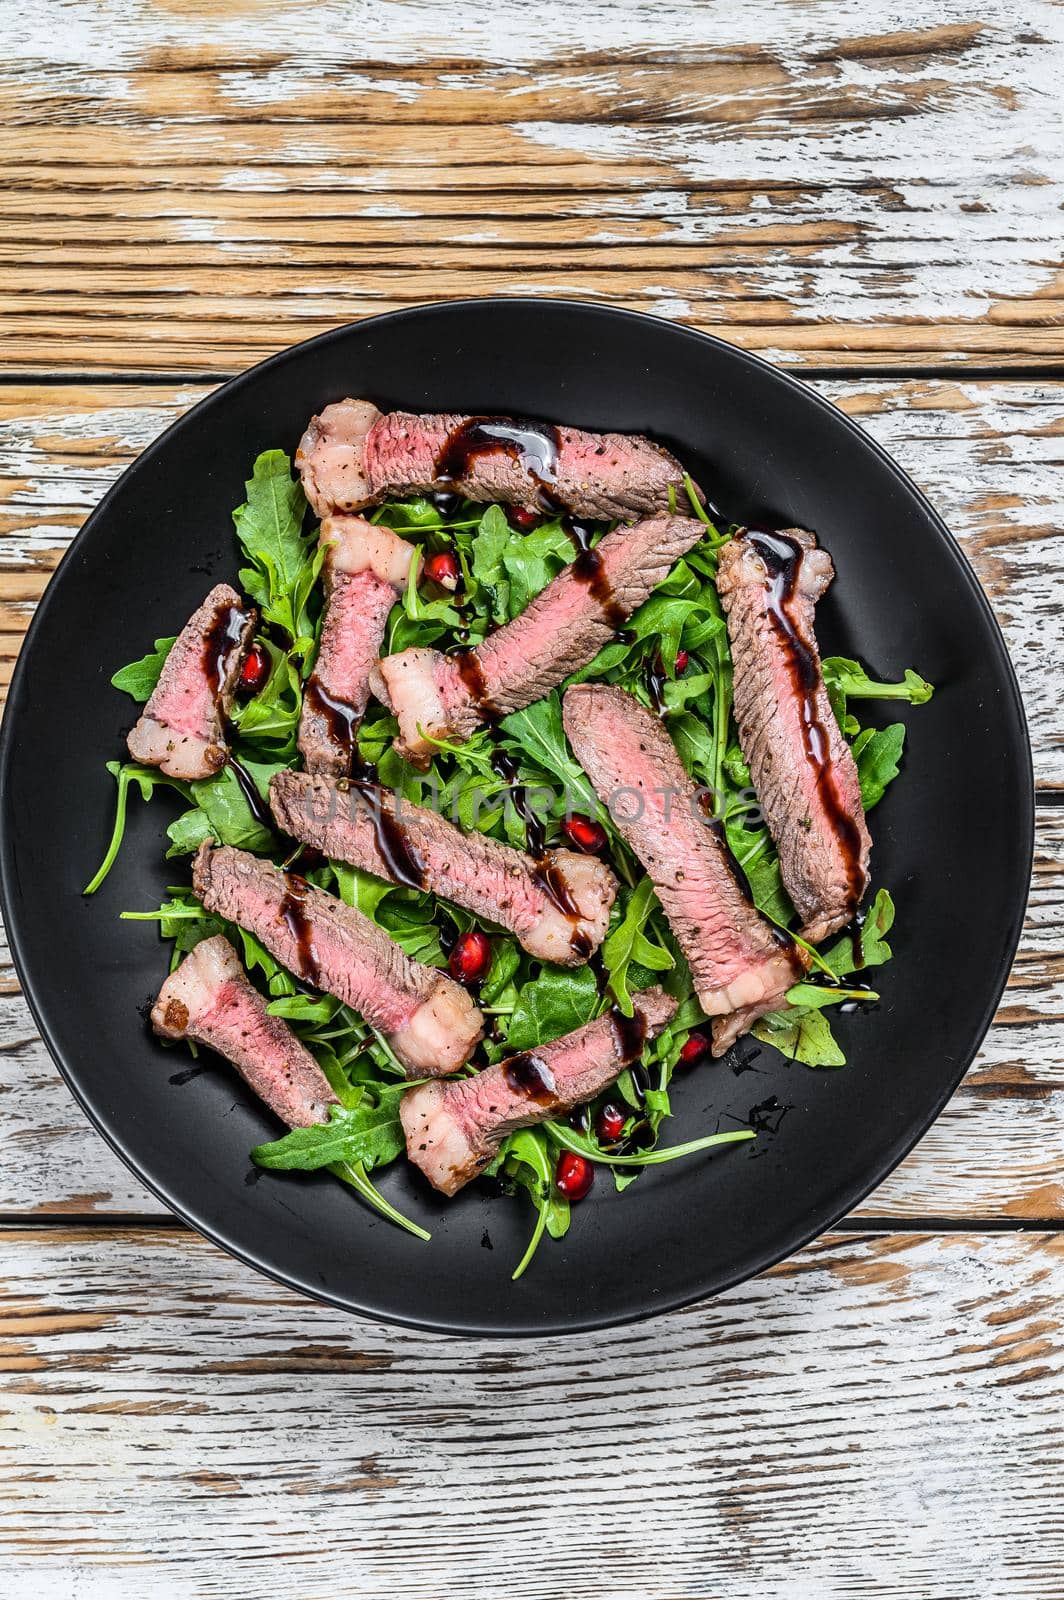 Sliced grilled beef steak with arugula leaves salad. White wooden background. Top view by Composter